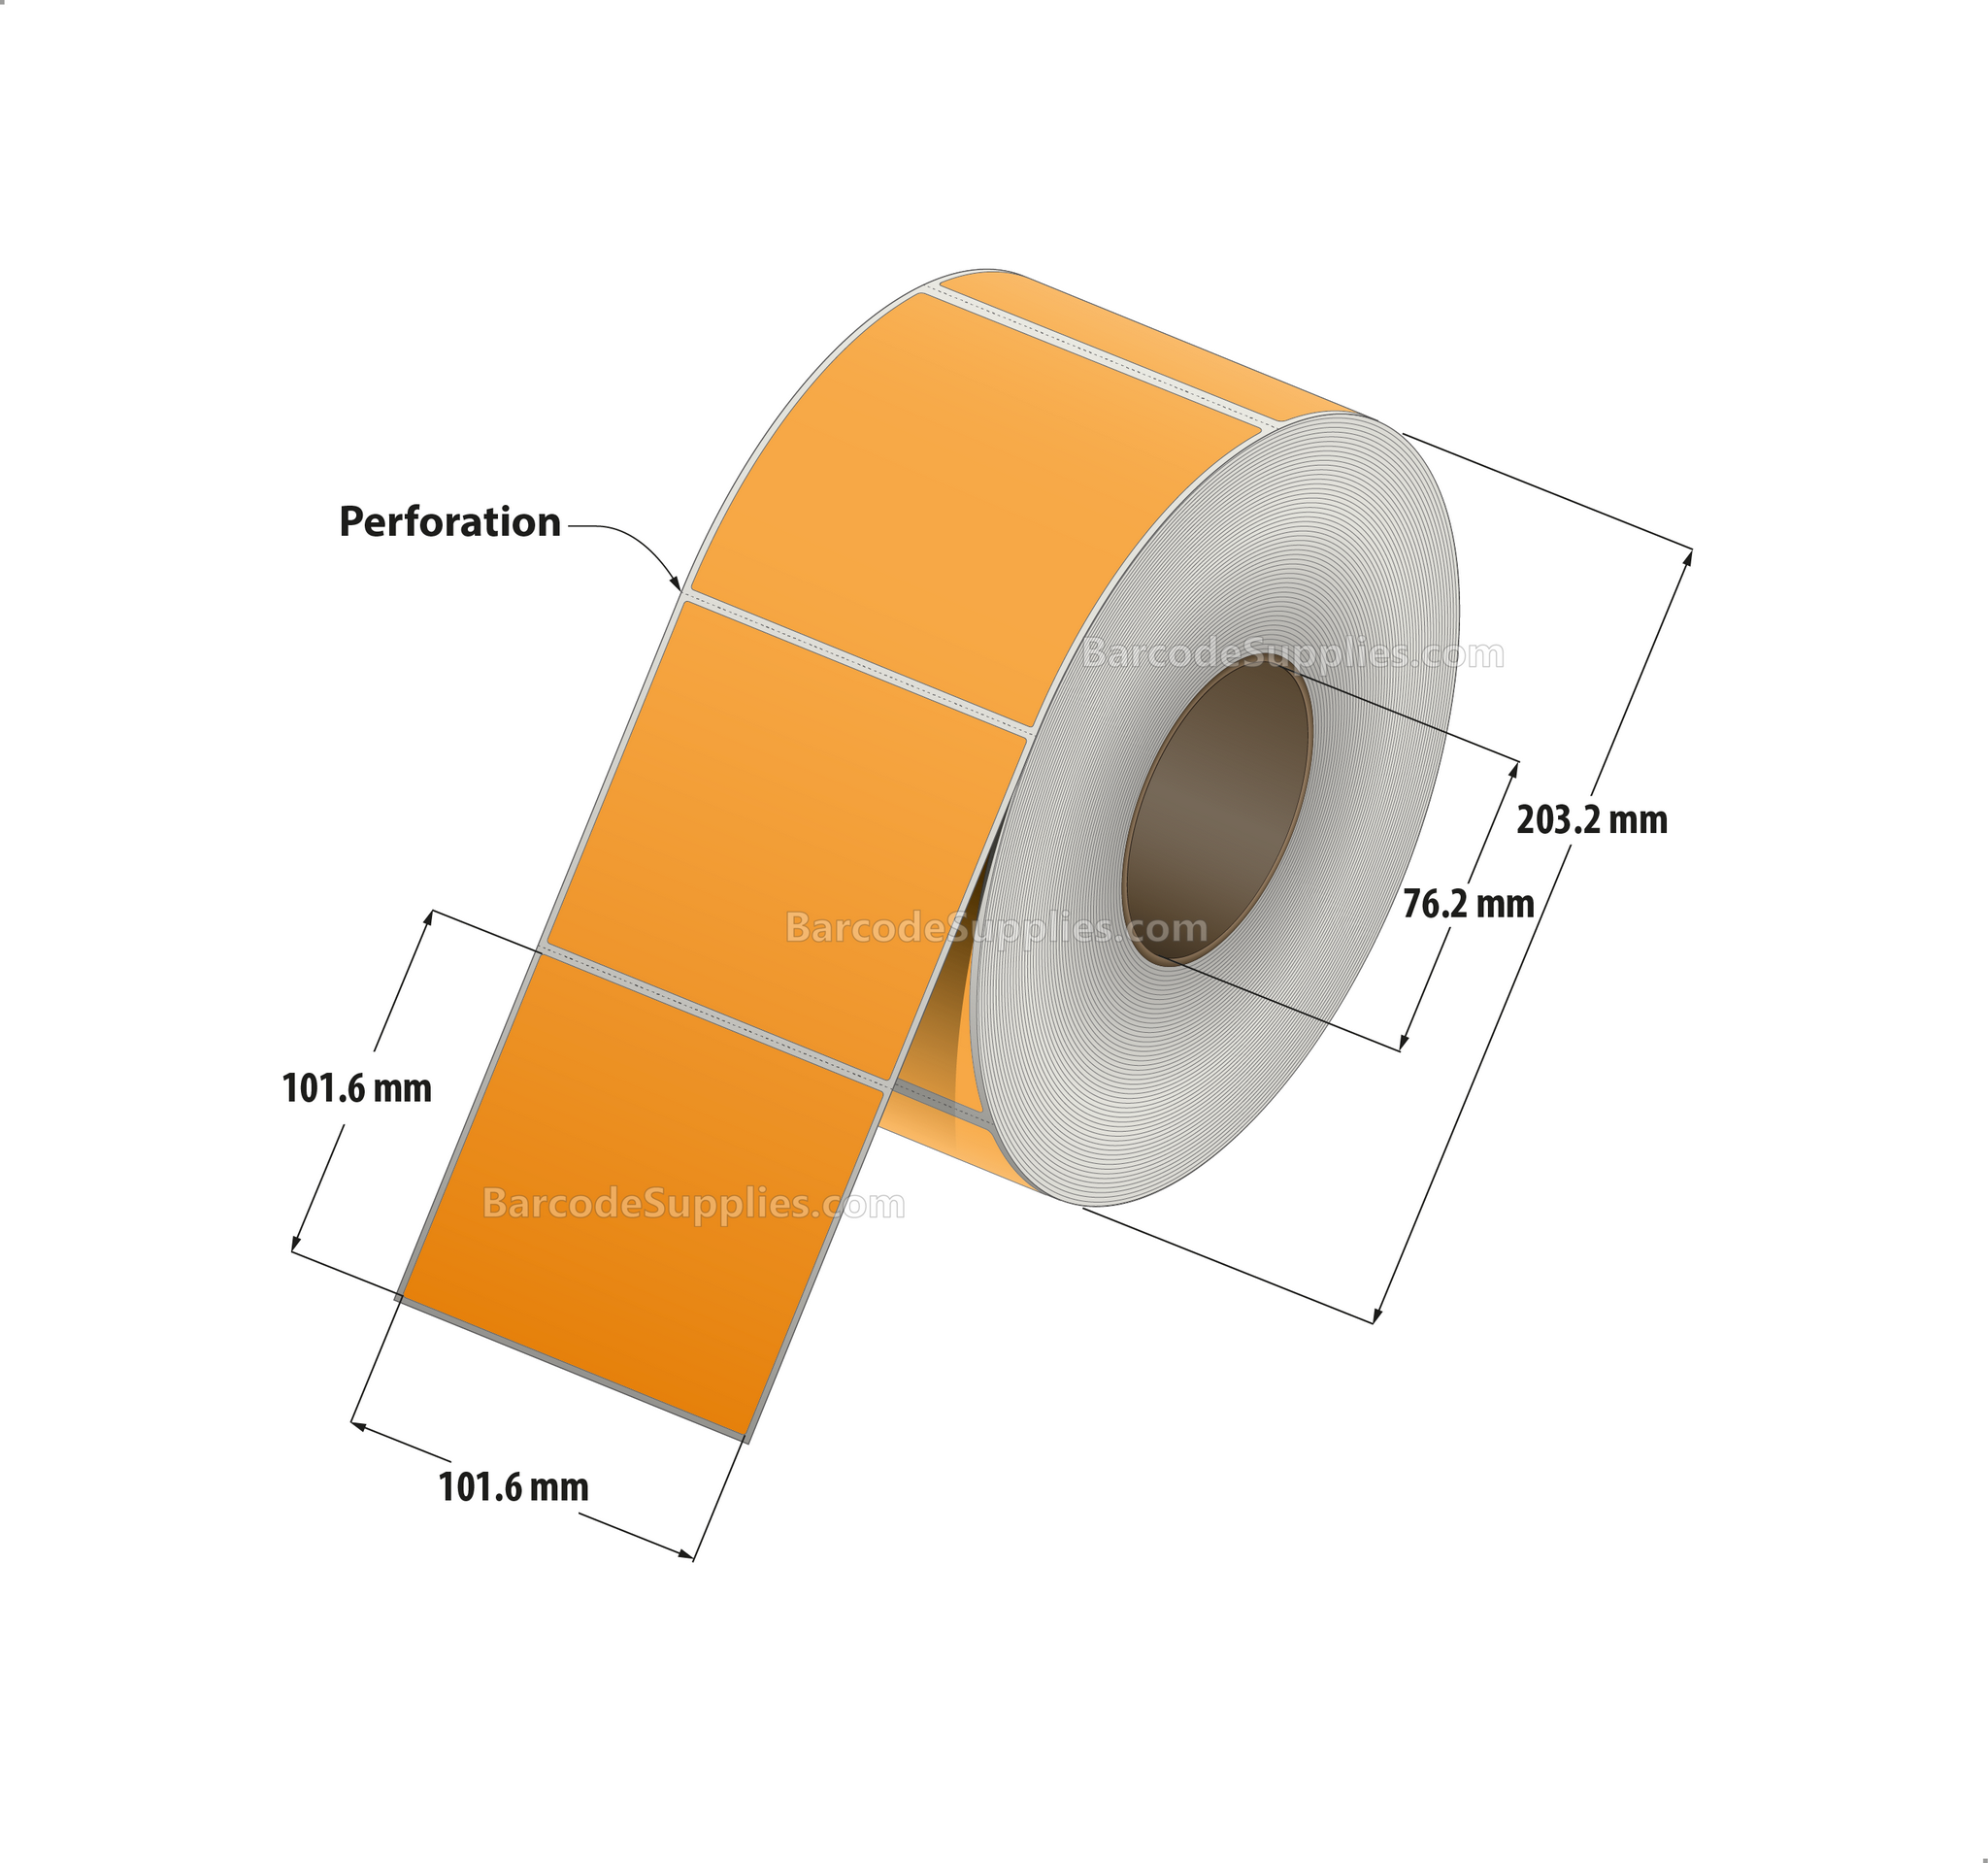 4 x 4 Thermal Transfer 136 Orange Labels With Permanent Acrylic Adhesive - Perforated - 1500 Labels Per Roll - Carton Of 4 Rolls - 6000 Labels Total - MPN: TH44-1PO